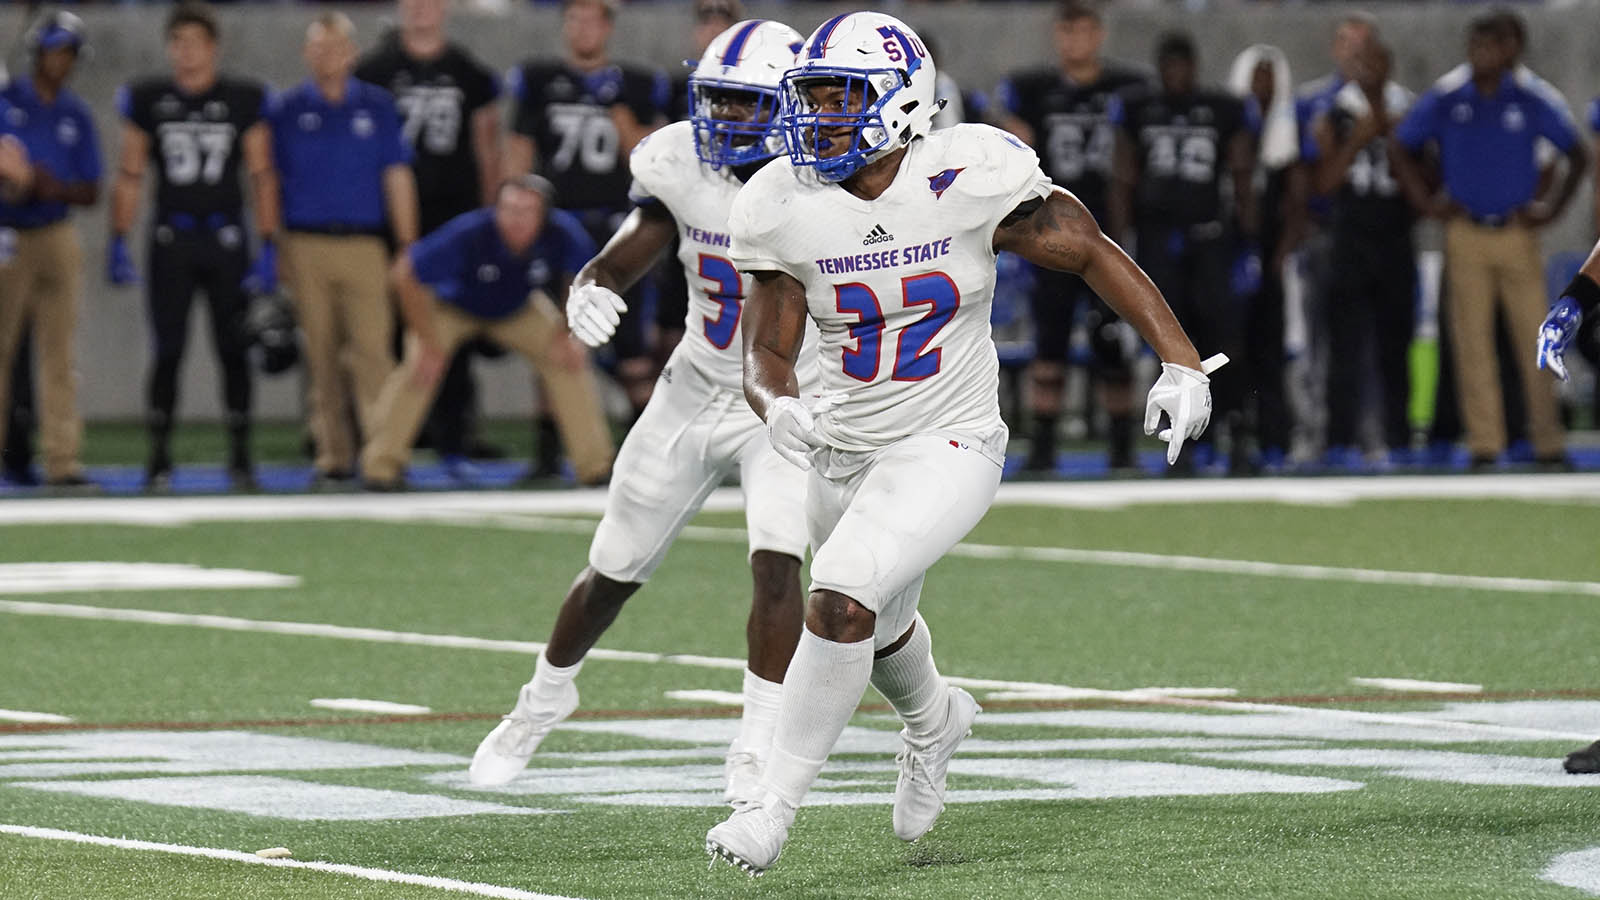 BOXTOROW HBCU Coaches Poll: FBS upset propels Tennessee State to No. 2